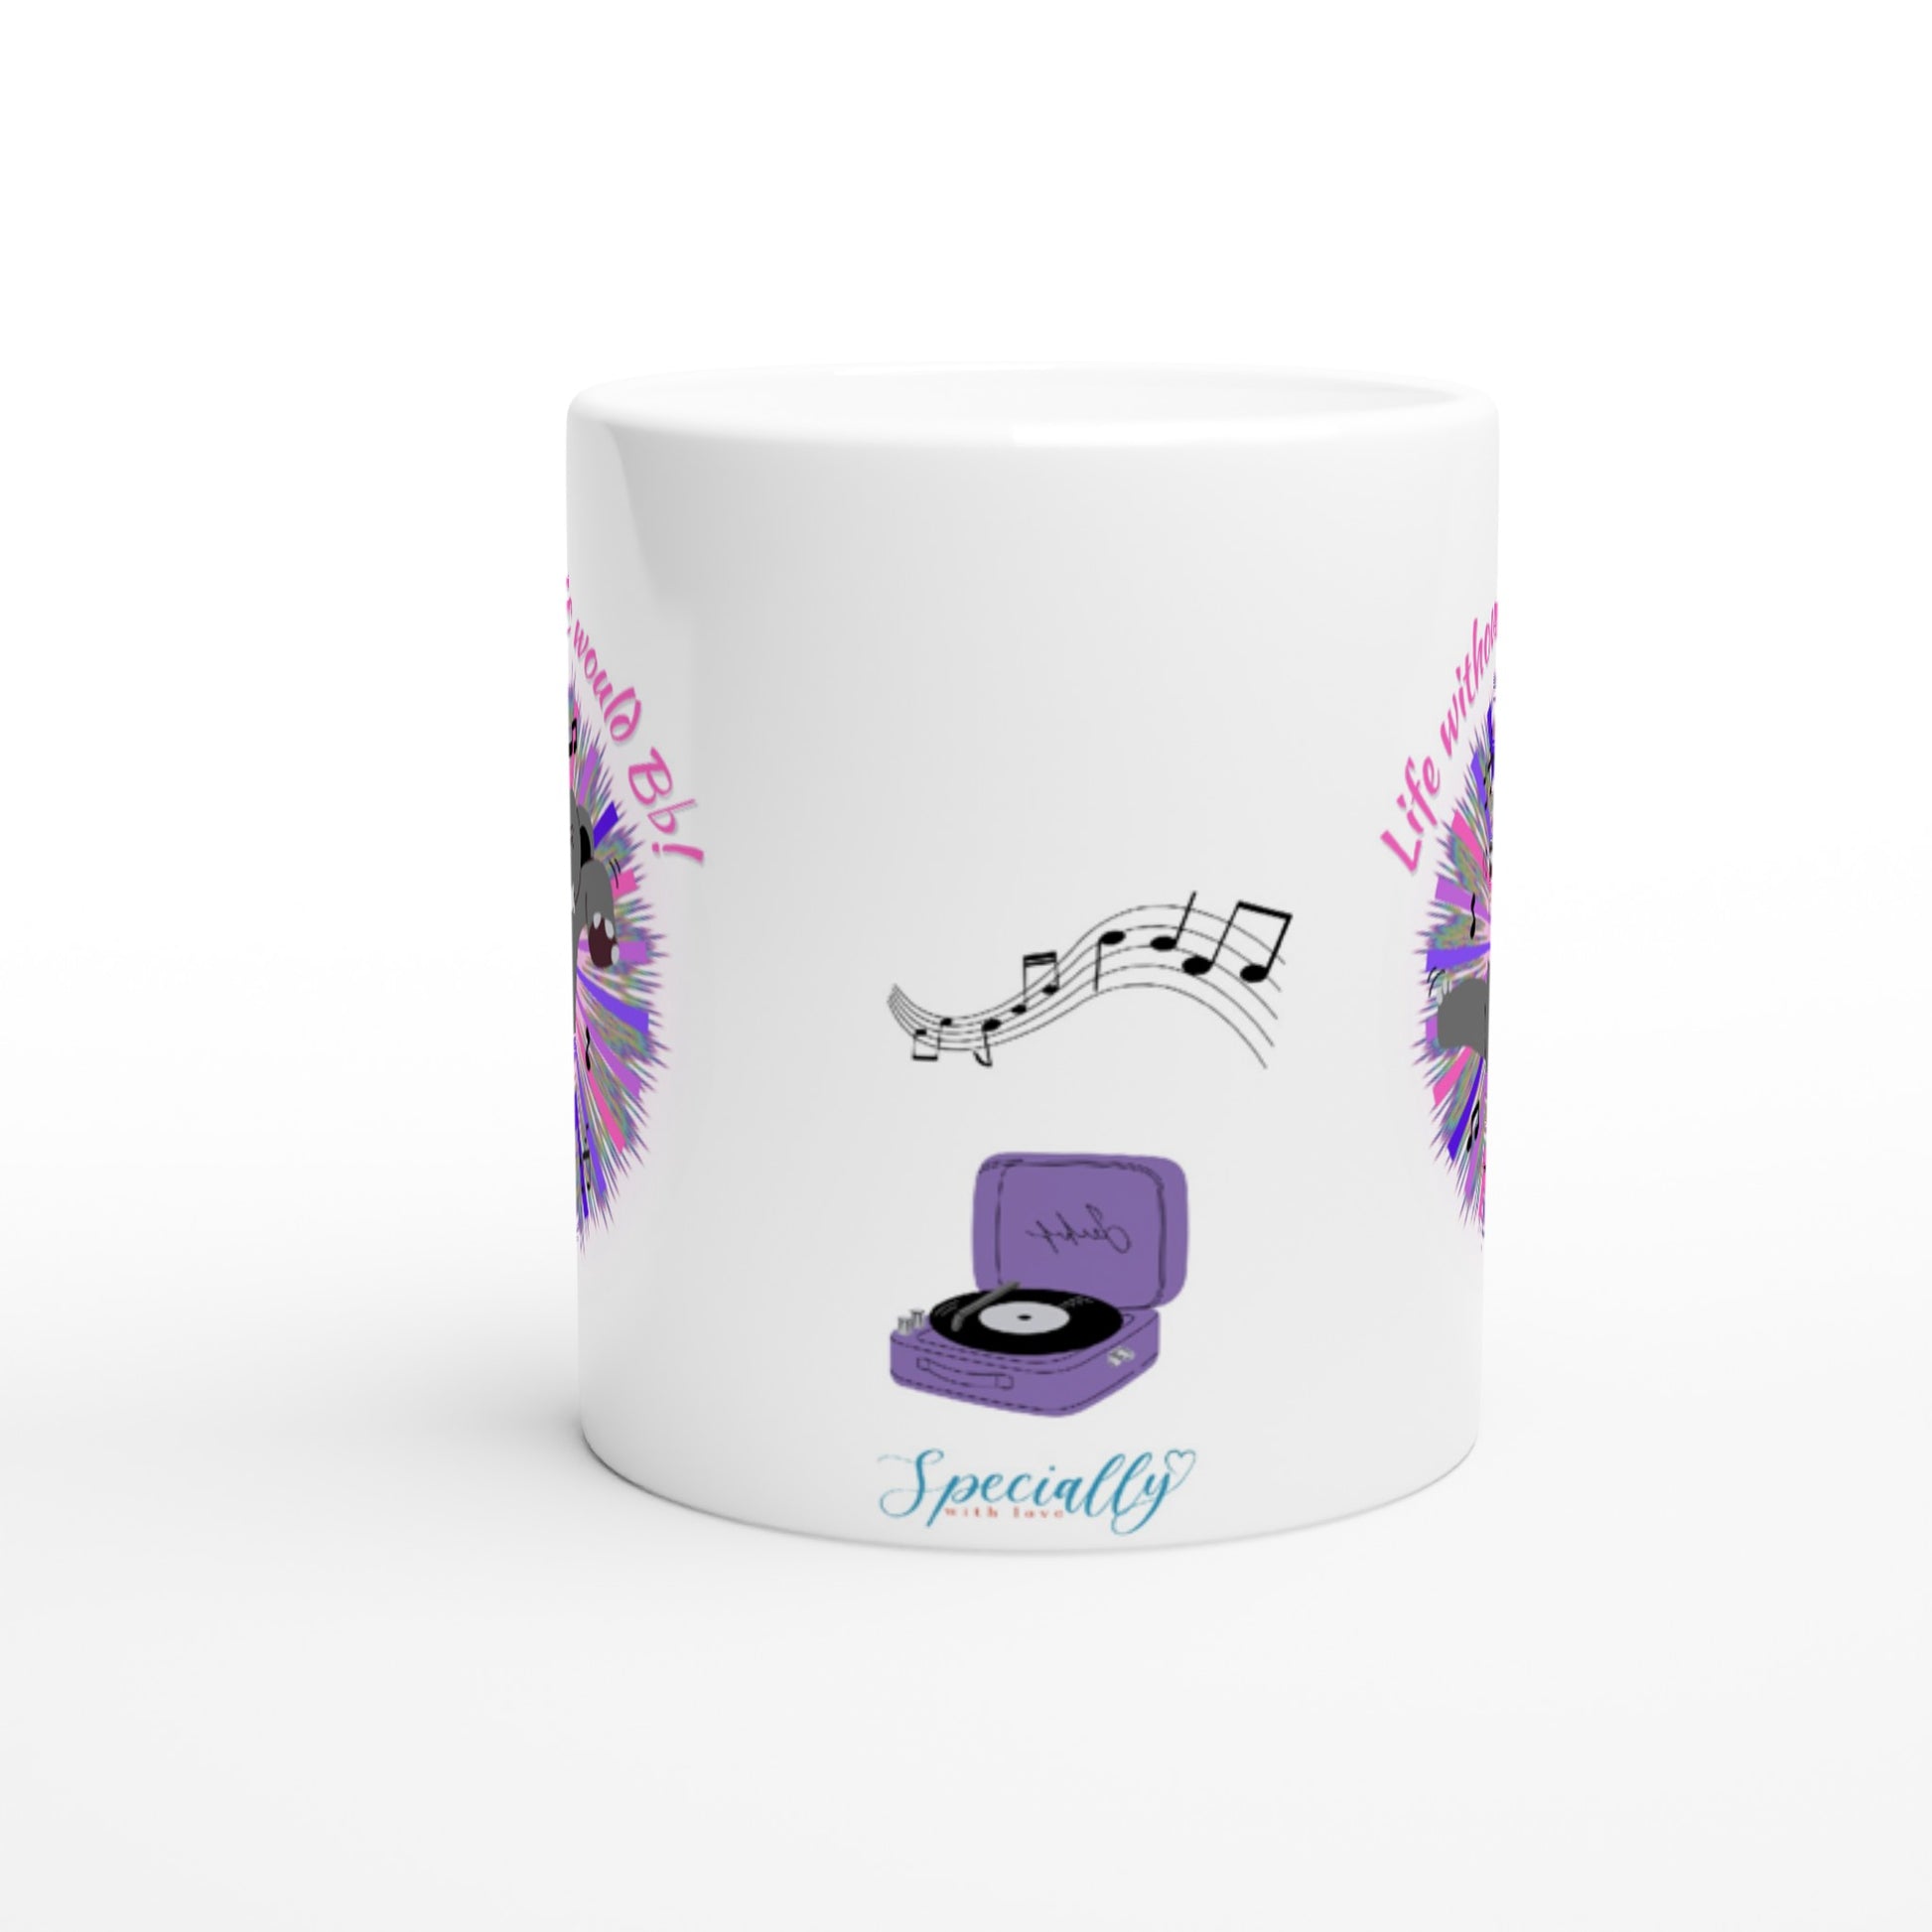 "Life without music would Bb!" 11 oz. Mug side view